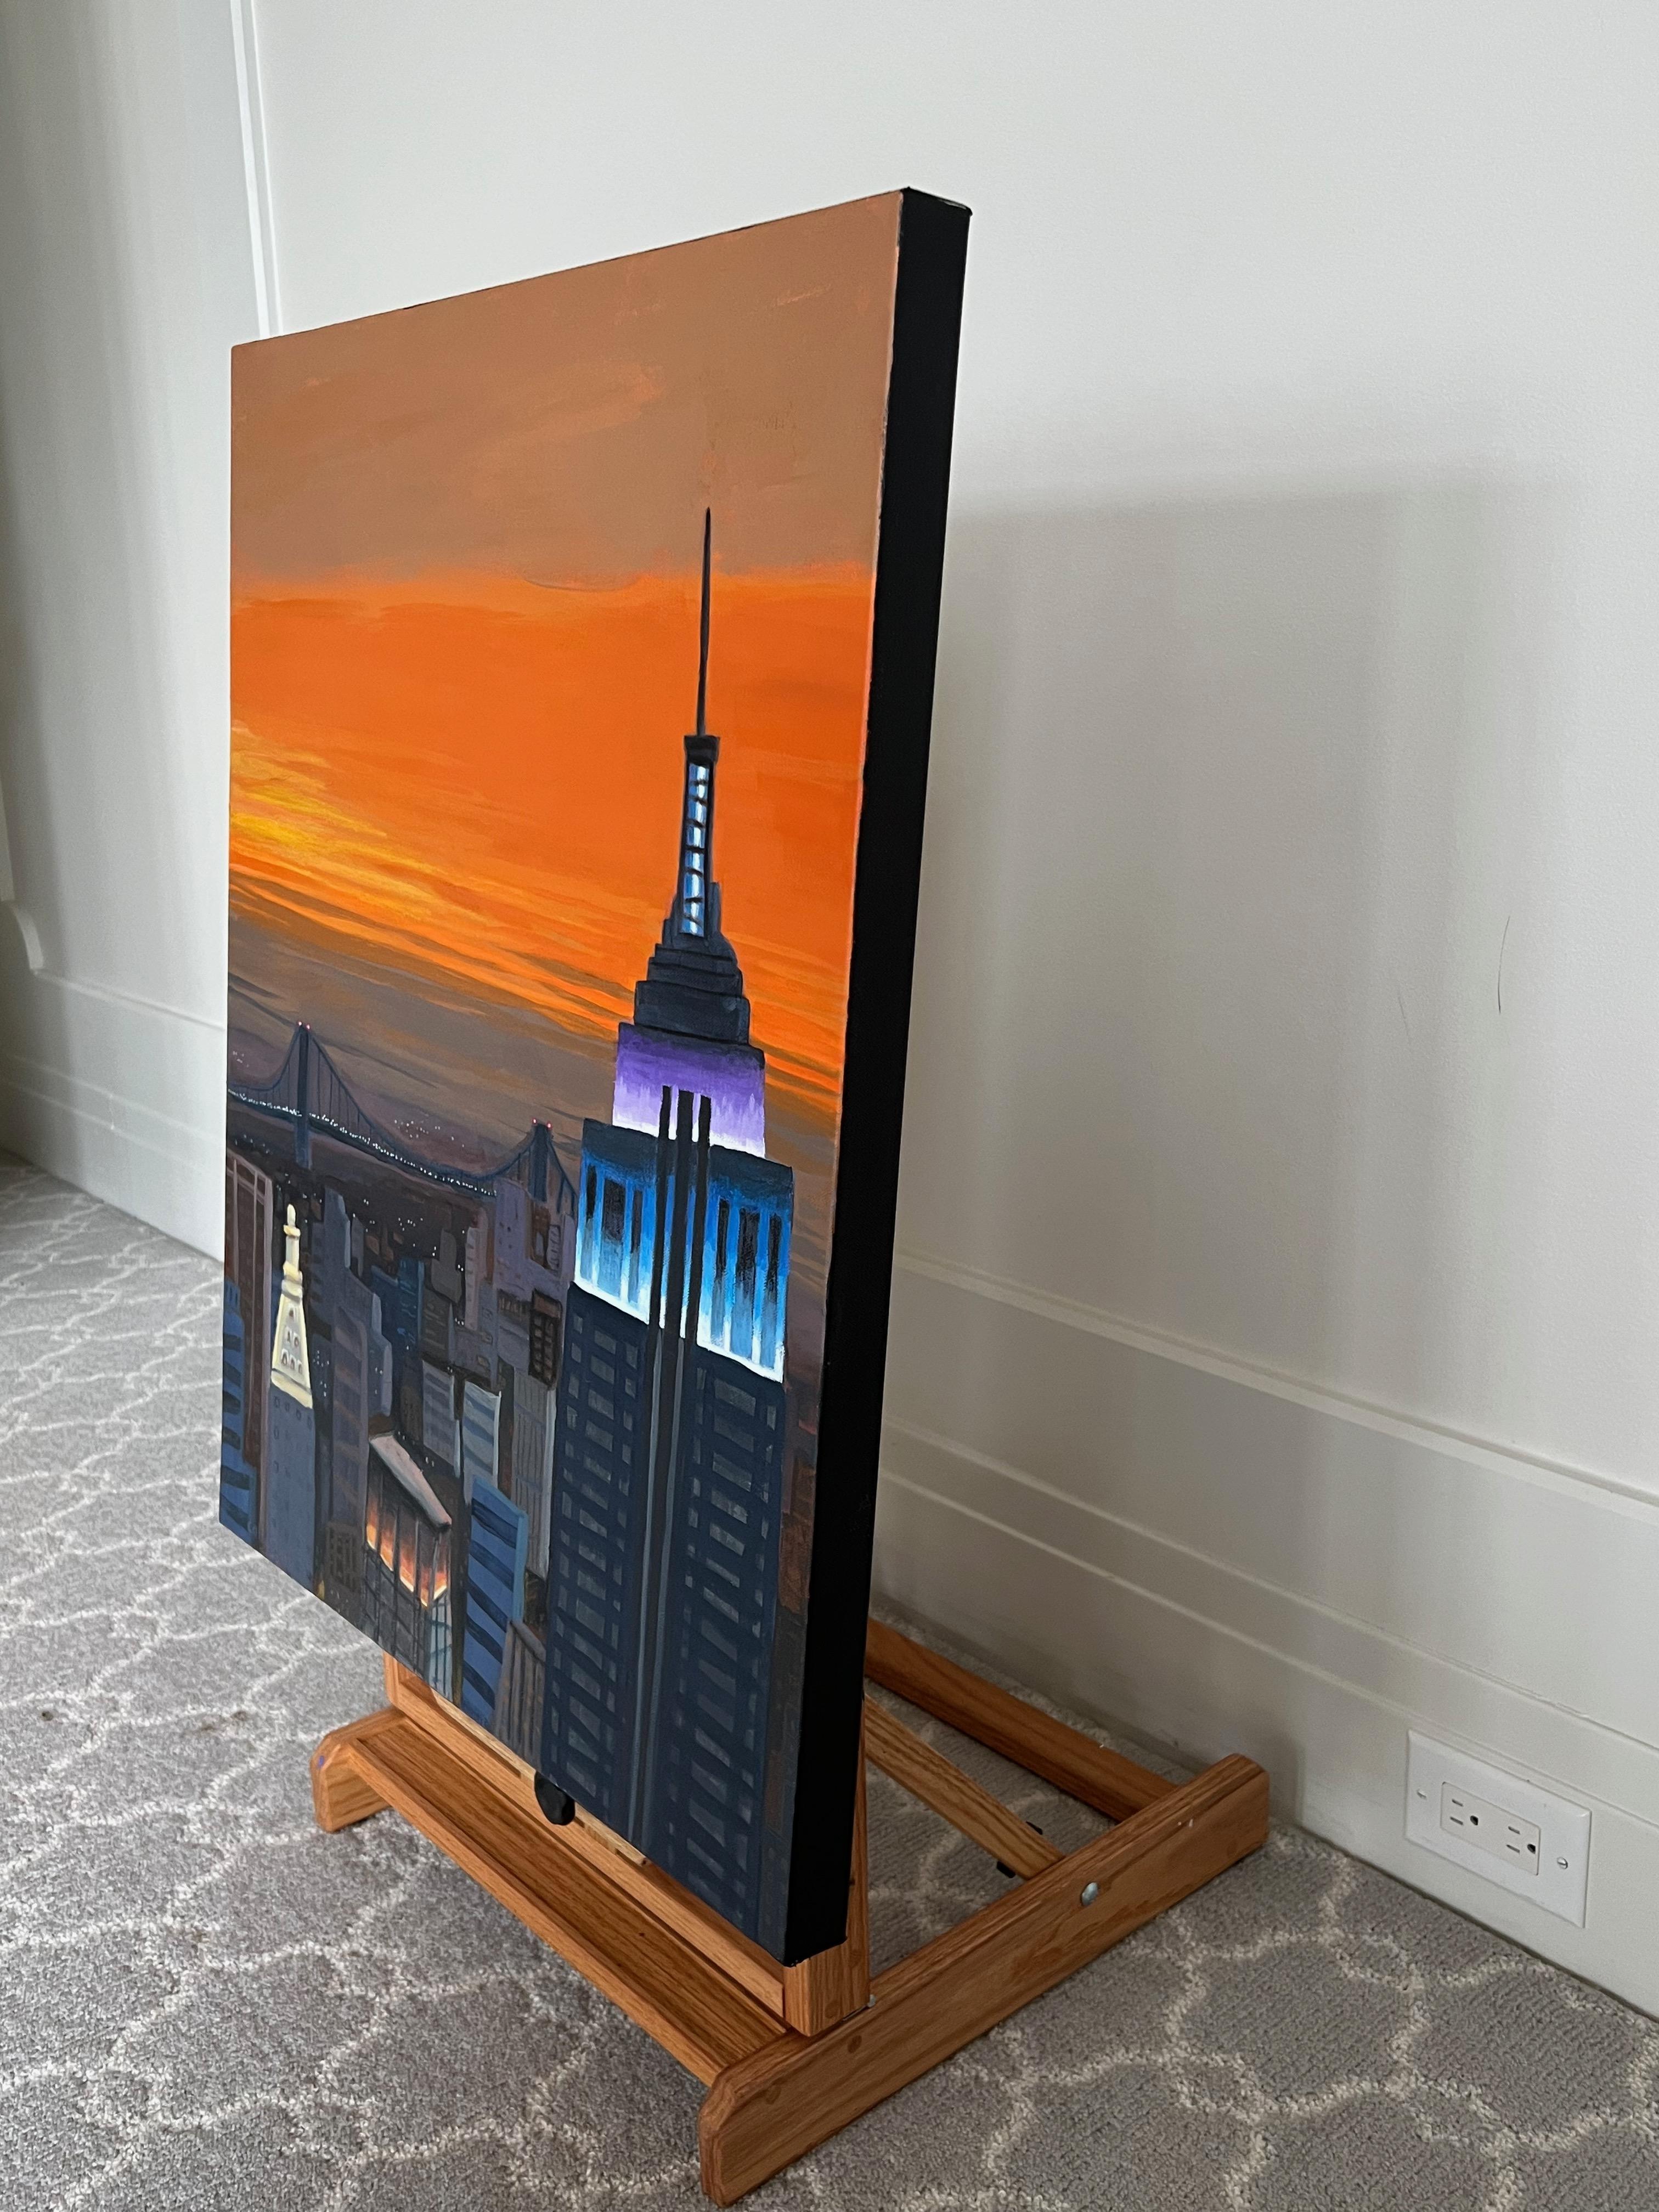 Empire State Building and an Orange Sky, Original Painting - Contemporary Mixed Media Art by Brian Callaghan